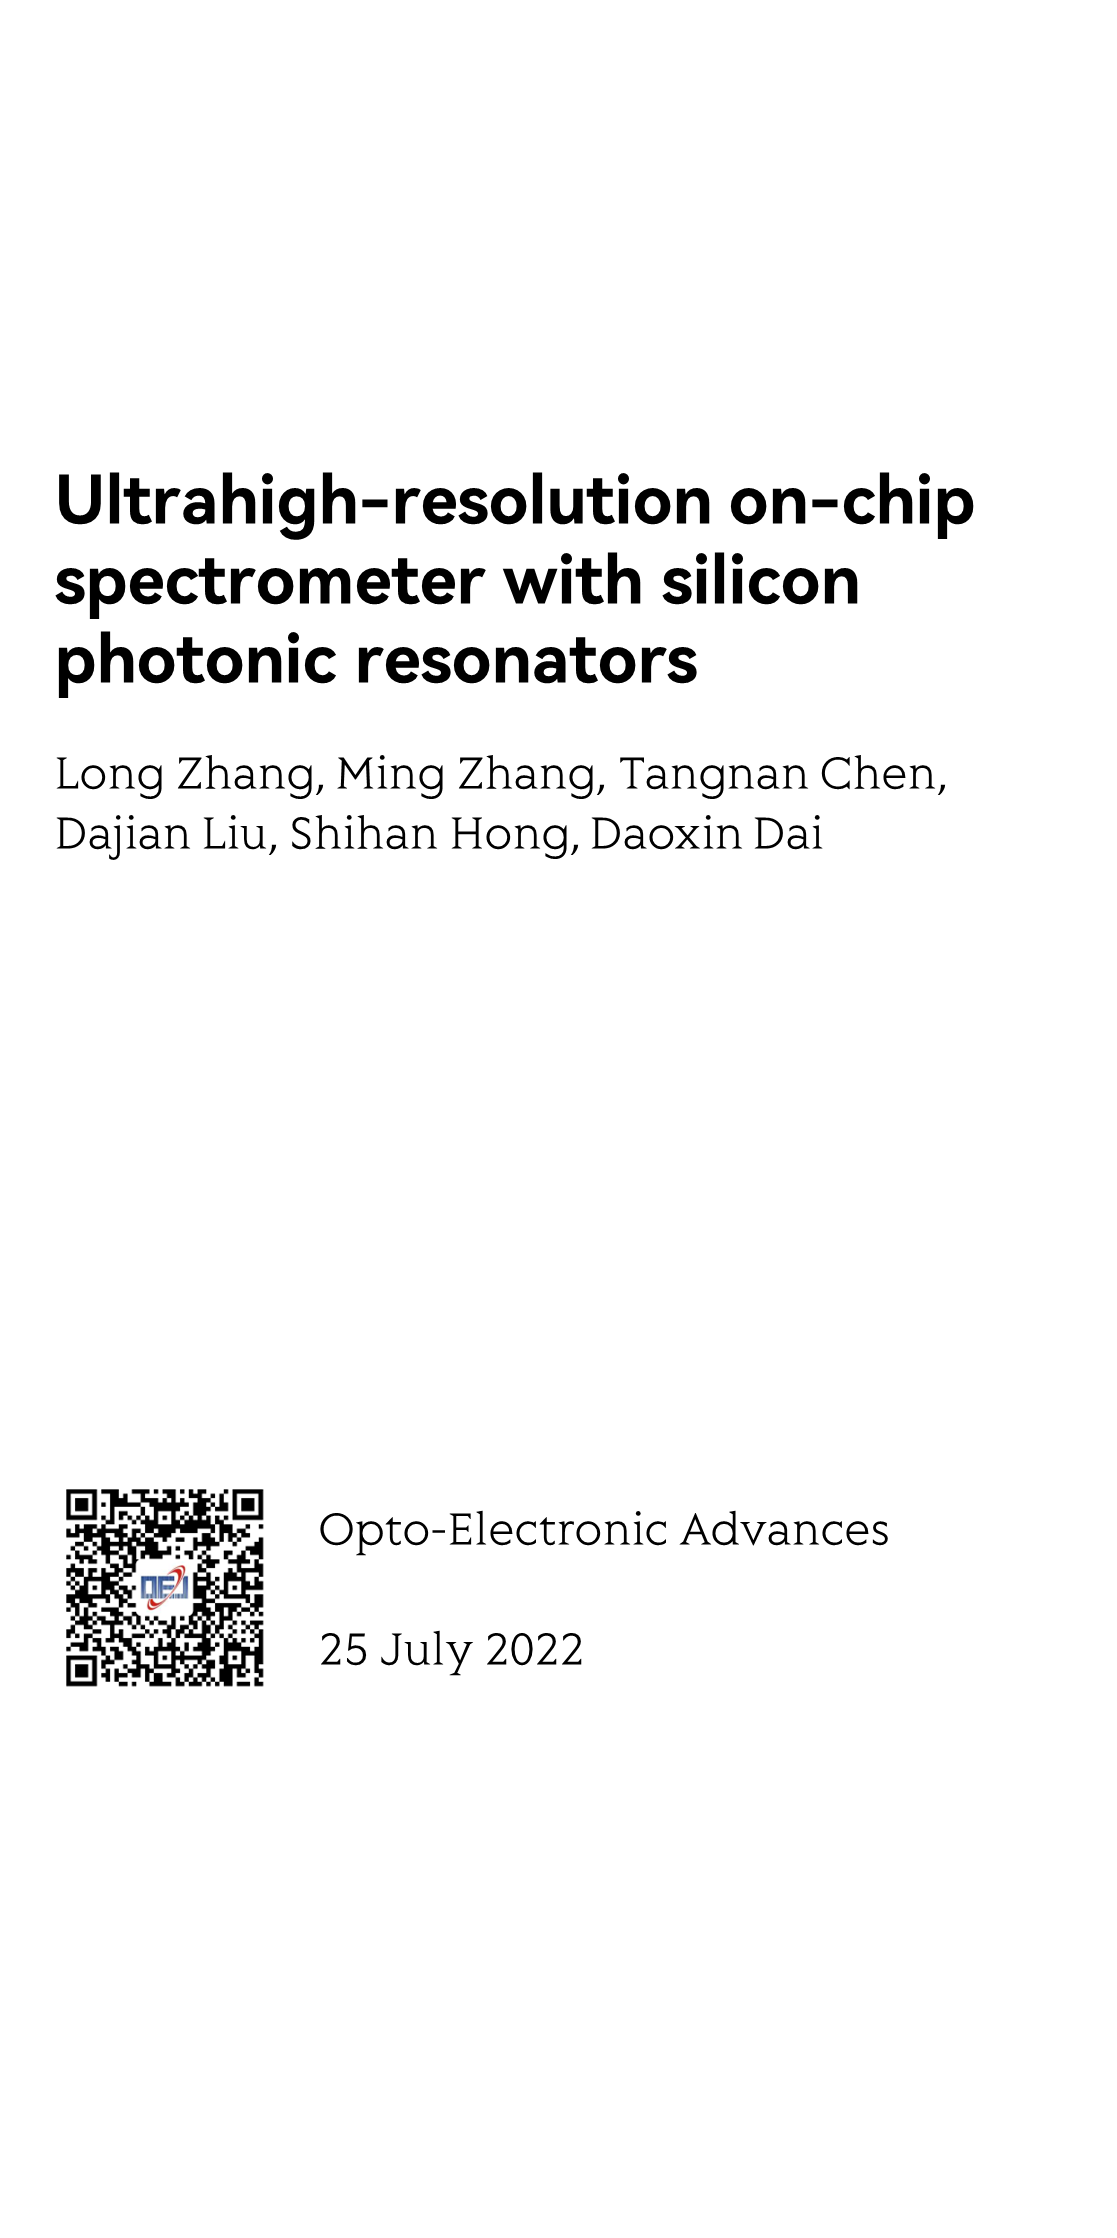 Ultrahigh-resolution on-chip spectrometer with silicon photonic resonators_1